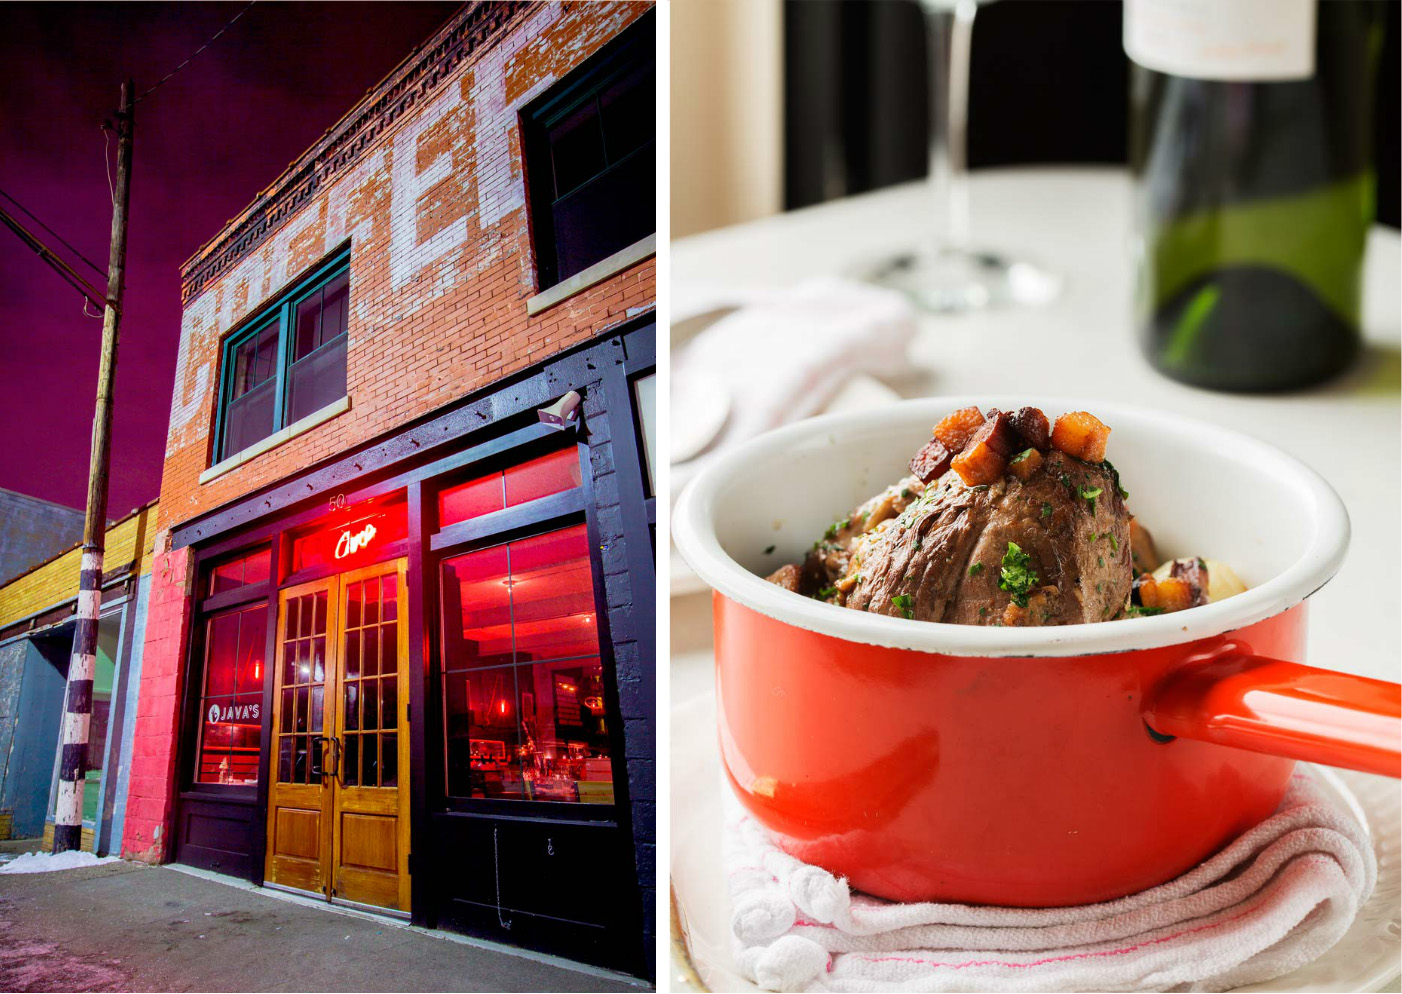 Cure restaurant exterior and Coq au vin in red bowl